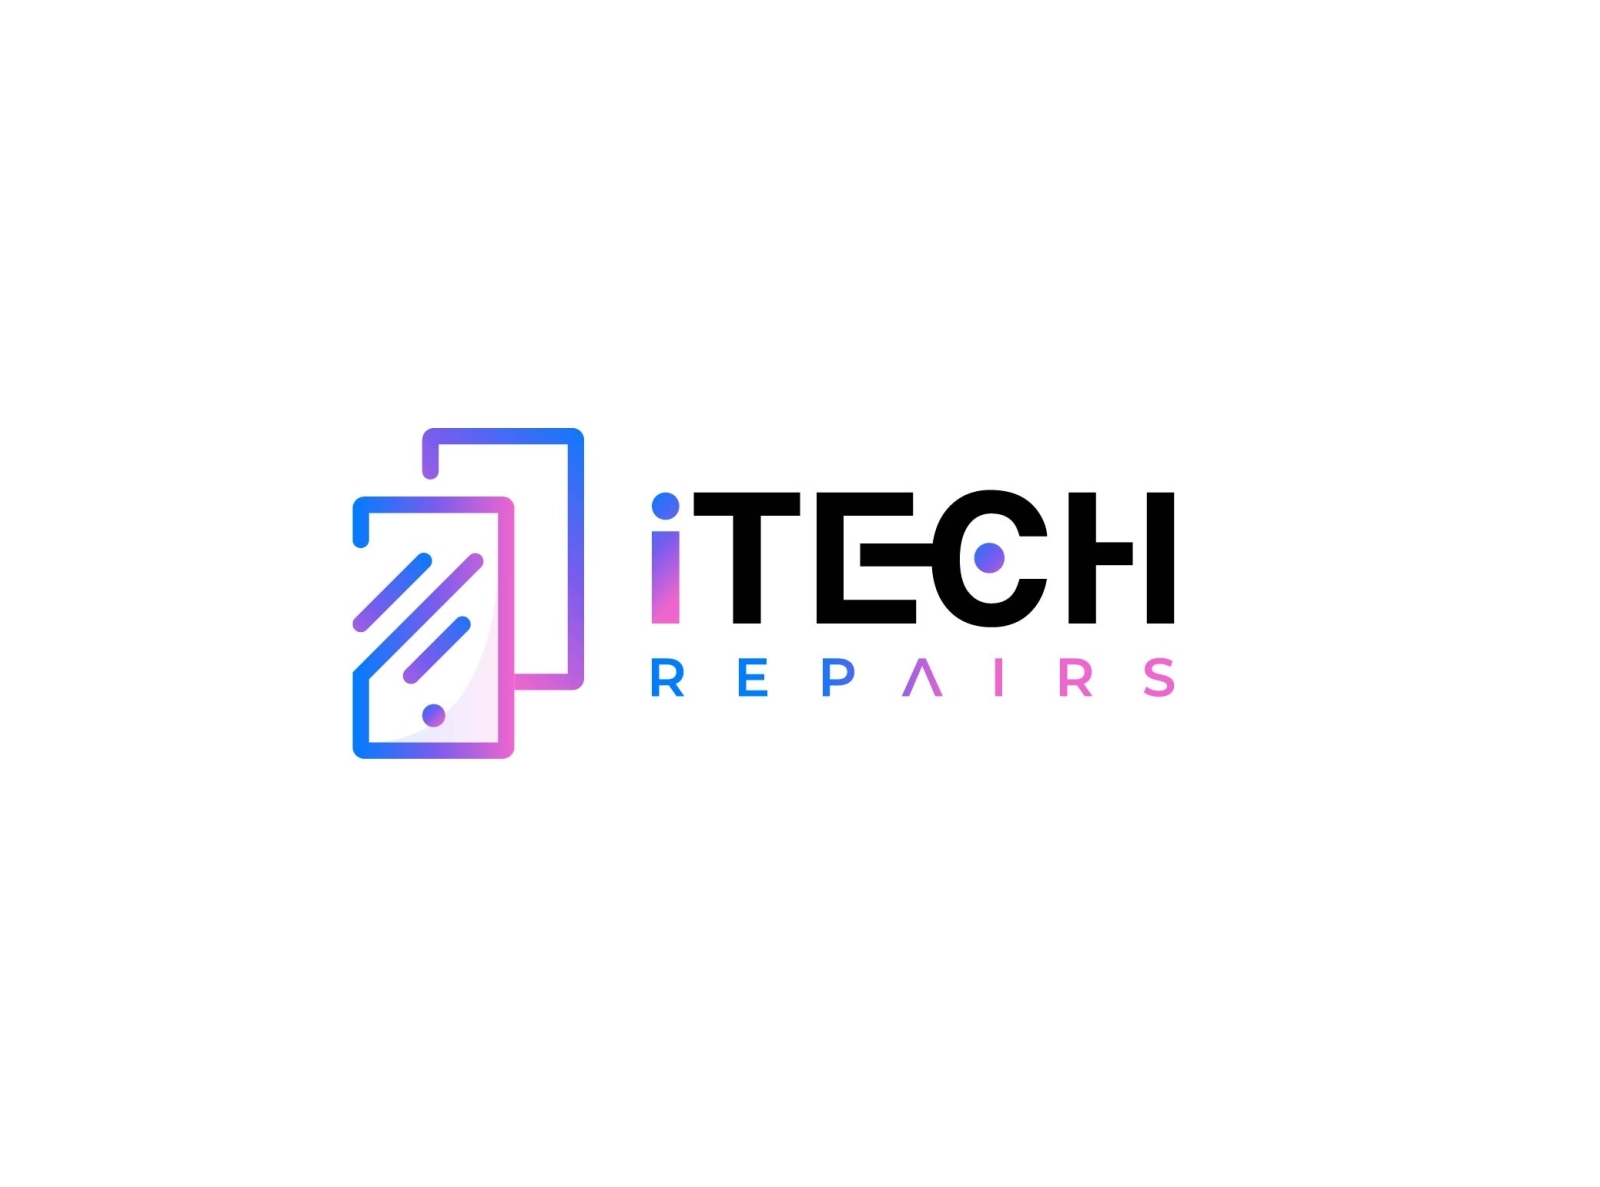 iTech Repairs LOGO 01 01 01 by Cubex on Dribbble